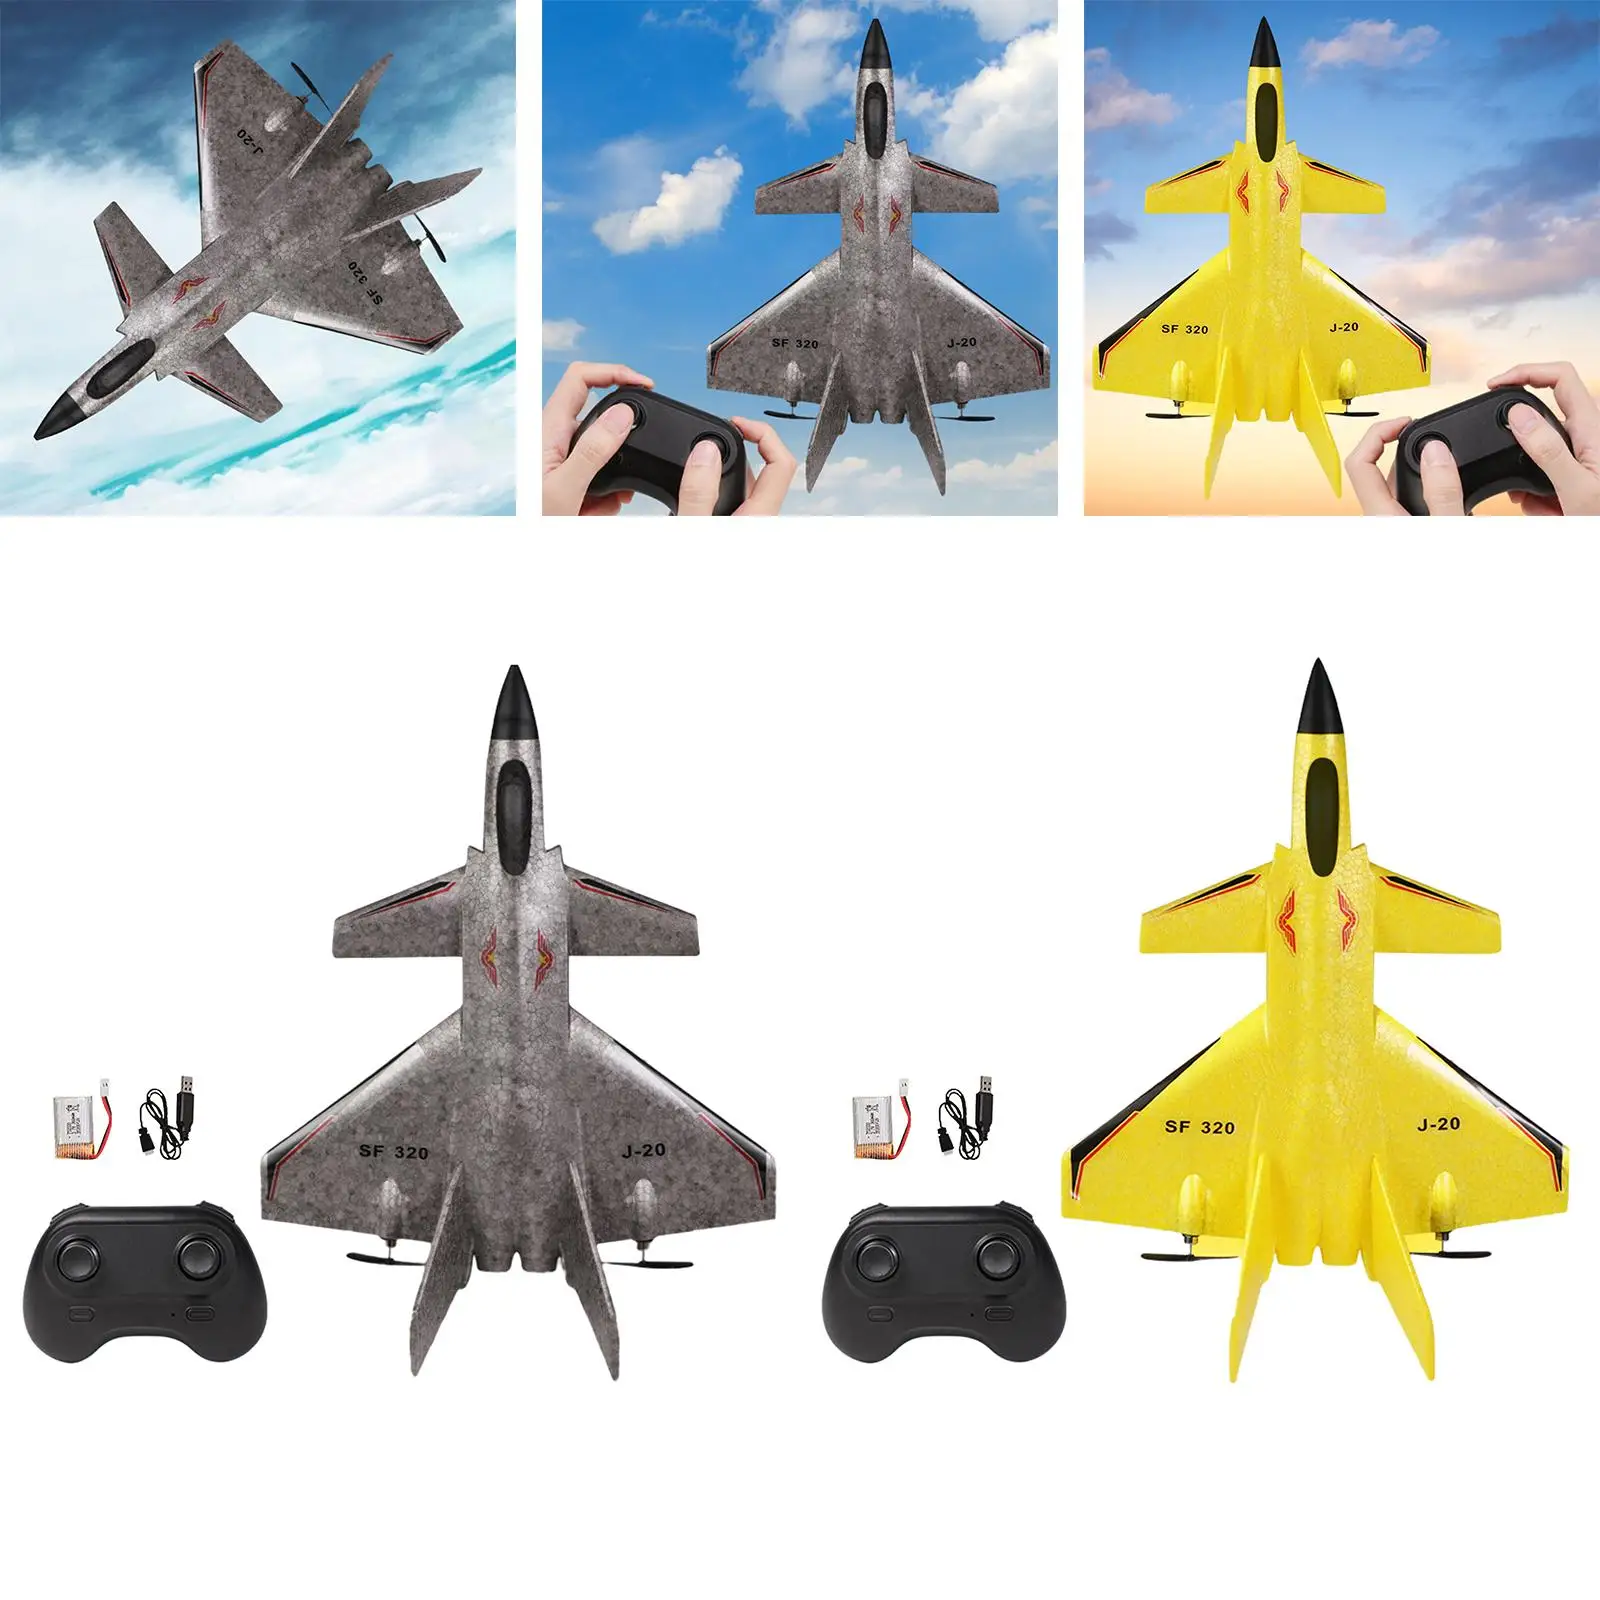 EPP RC Airplane 2.4G Gliding Aircraft Model Plane Toy Foam Plane Toys for Outdoor